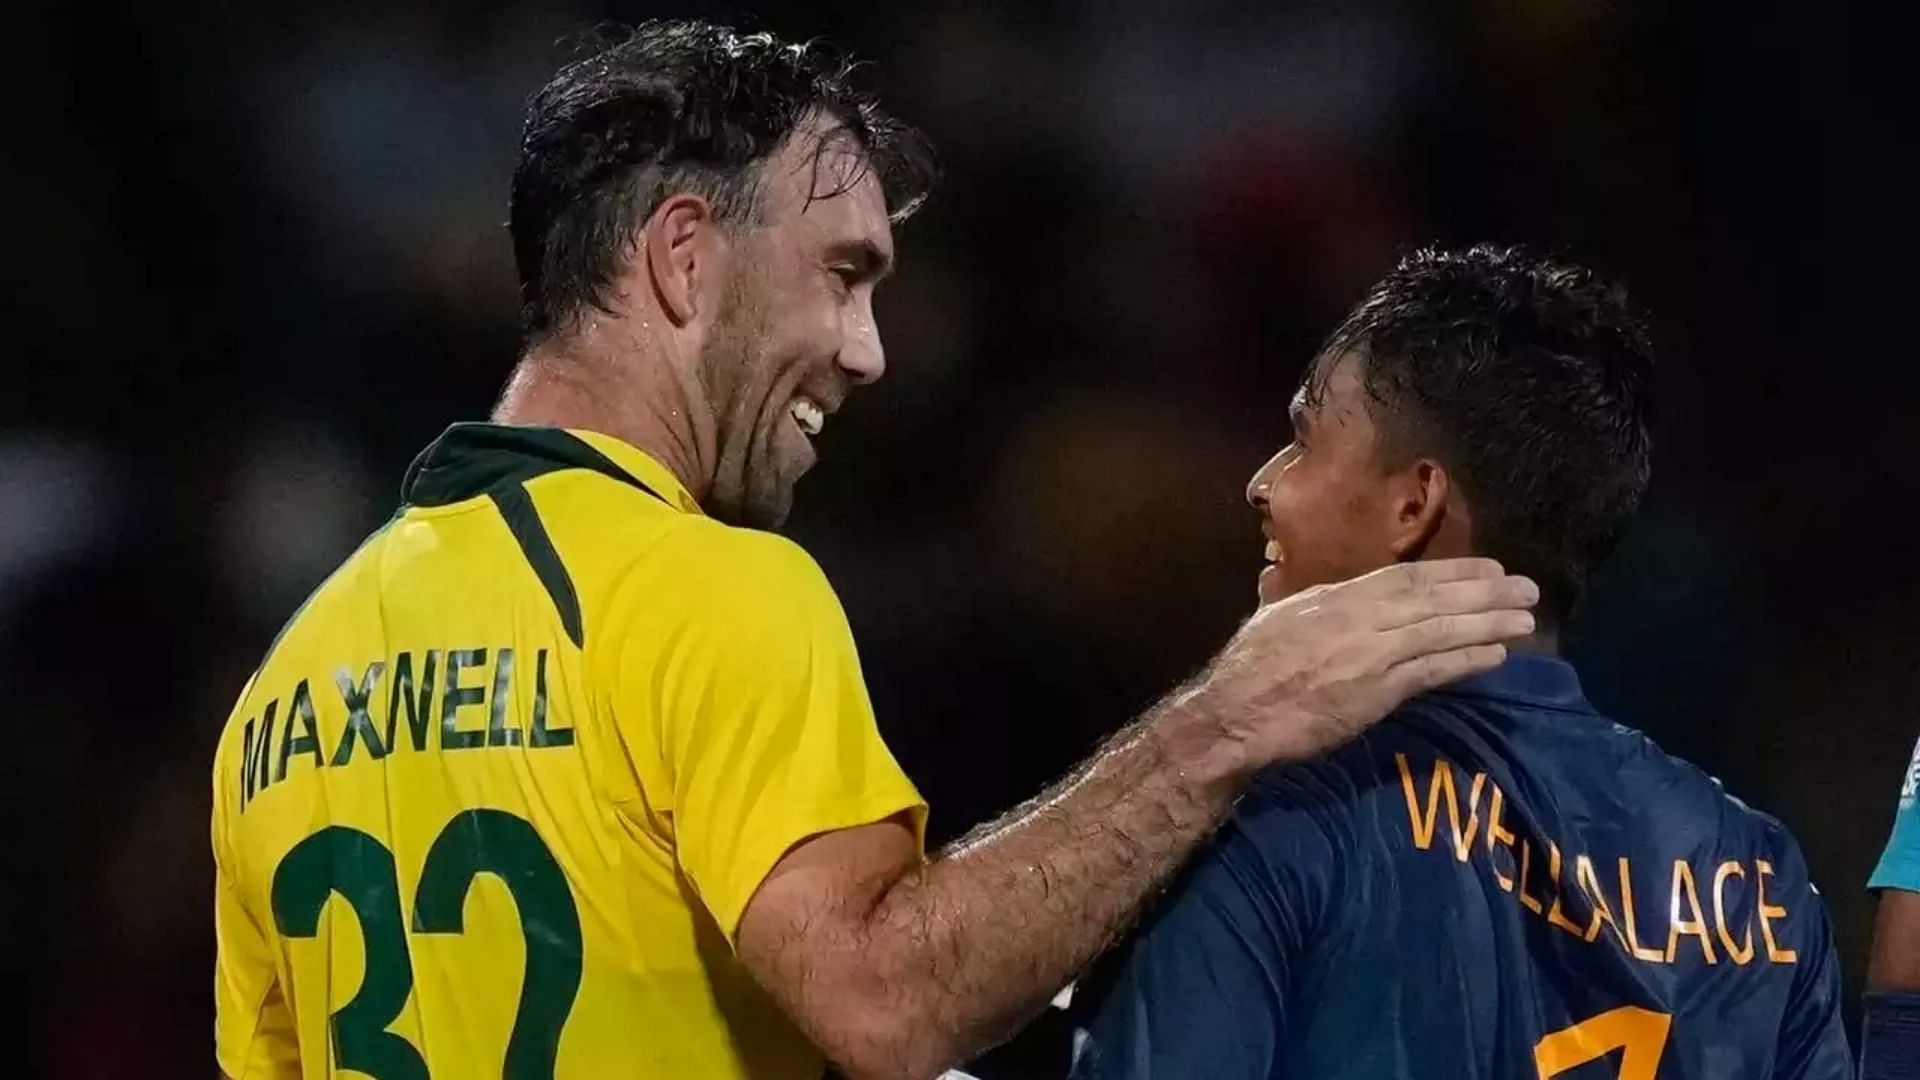 Can Glenn Maxwell (left) inspire Australia to a win and get them up and running in this World Cup?